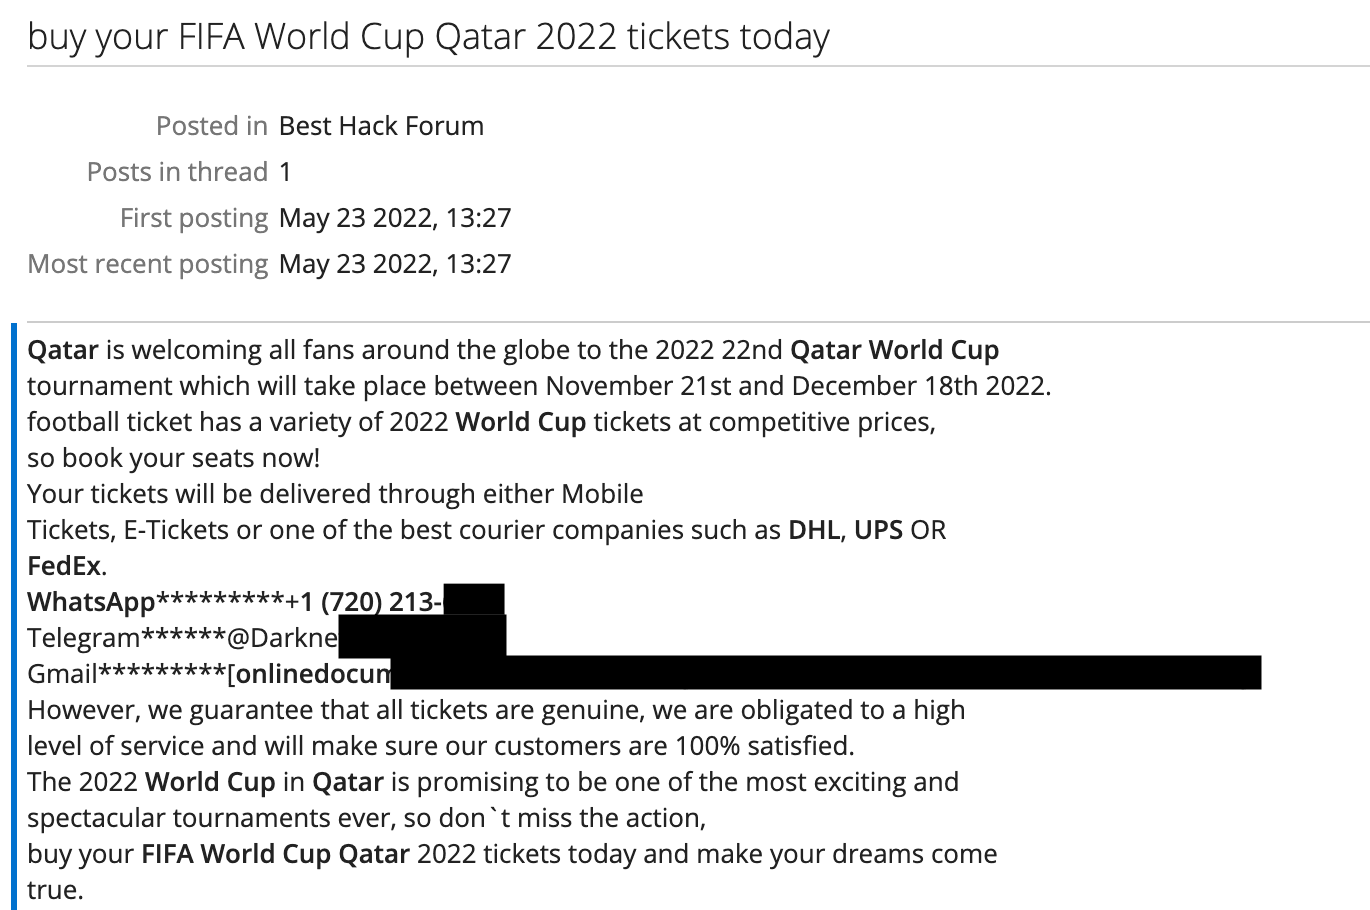 fielding_cyber_influence-and_physical_threats_to_2022_fifa_world_cup_in_qatar_figure_2.png